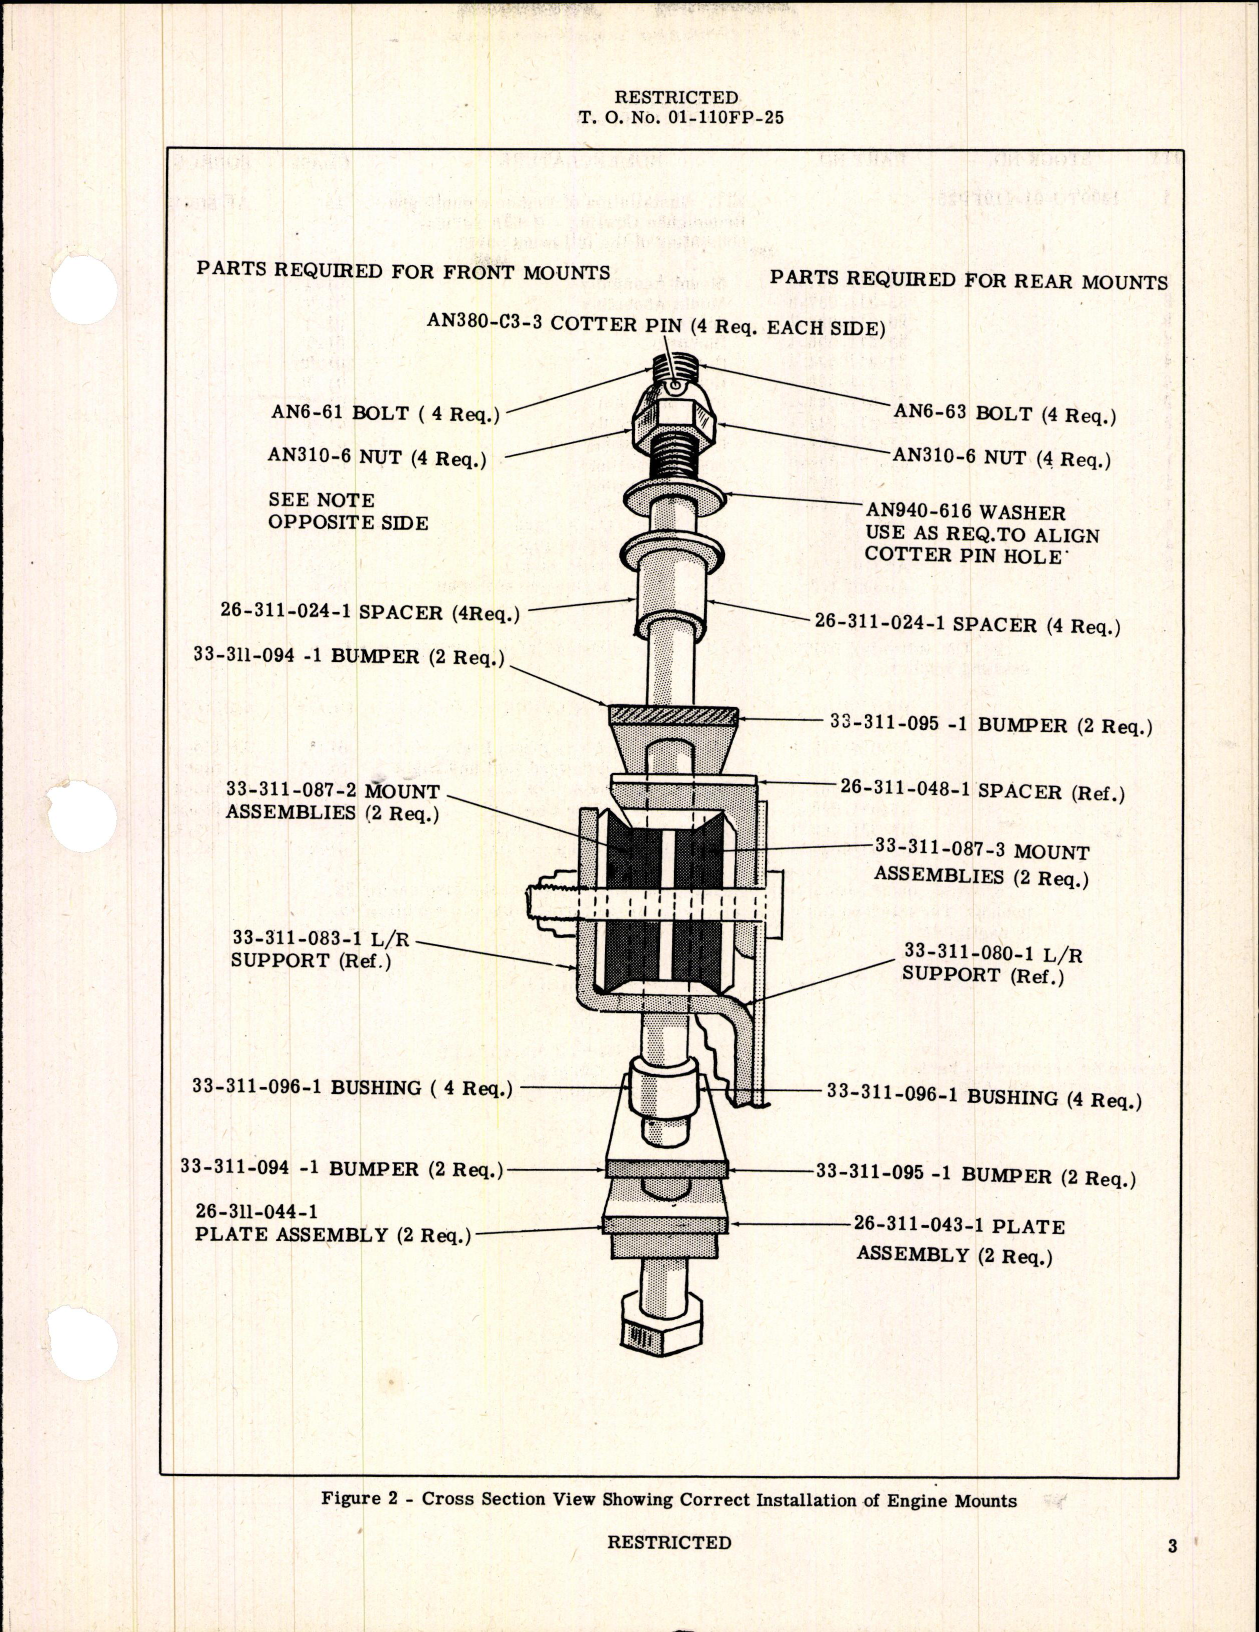 Sample page 3 from AirCorps Library document: Installation of Engine Mounts & Redesigned Engine Cowling